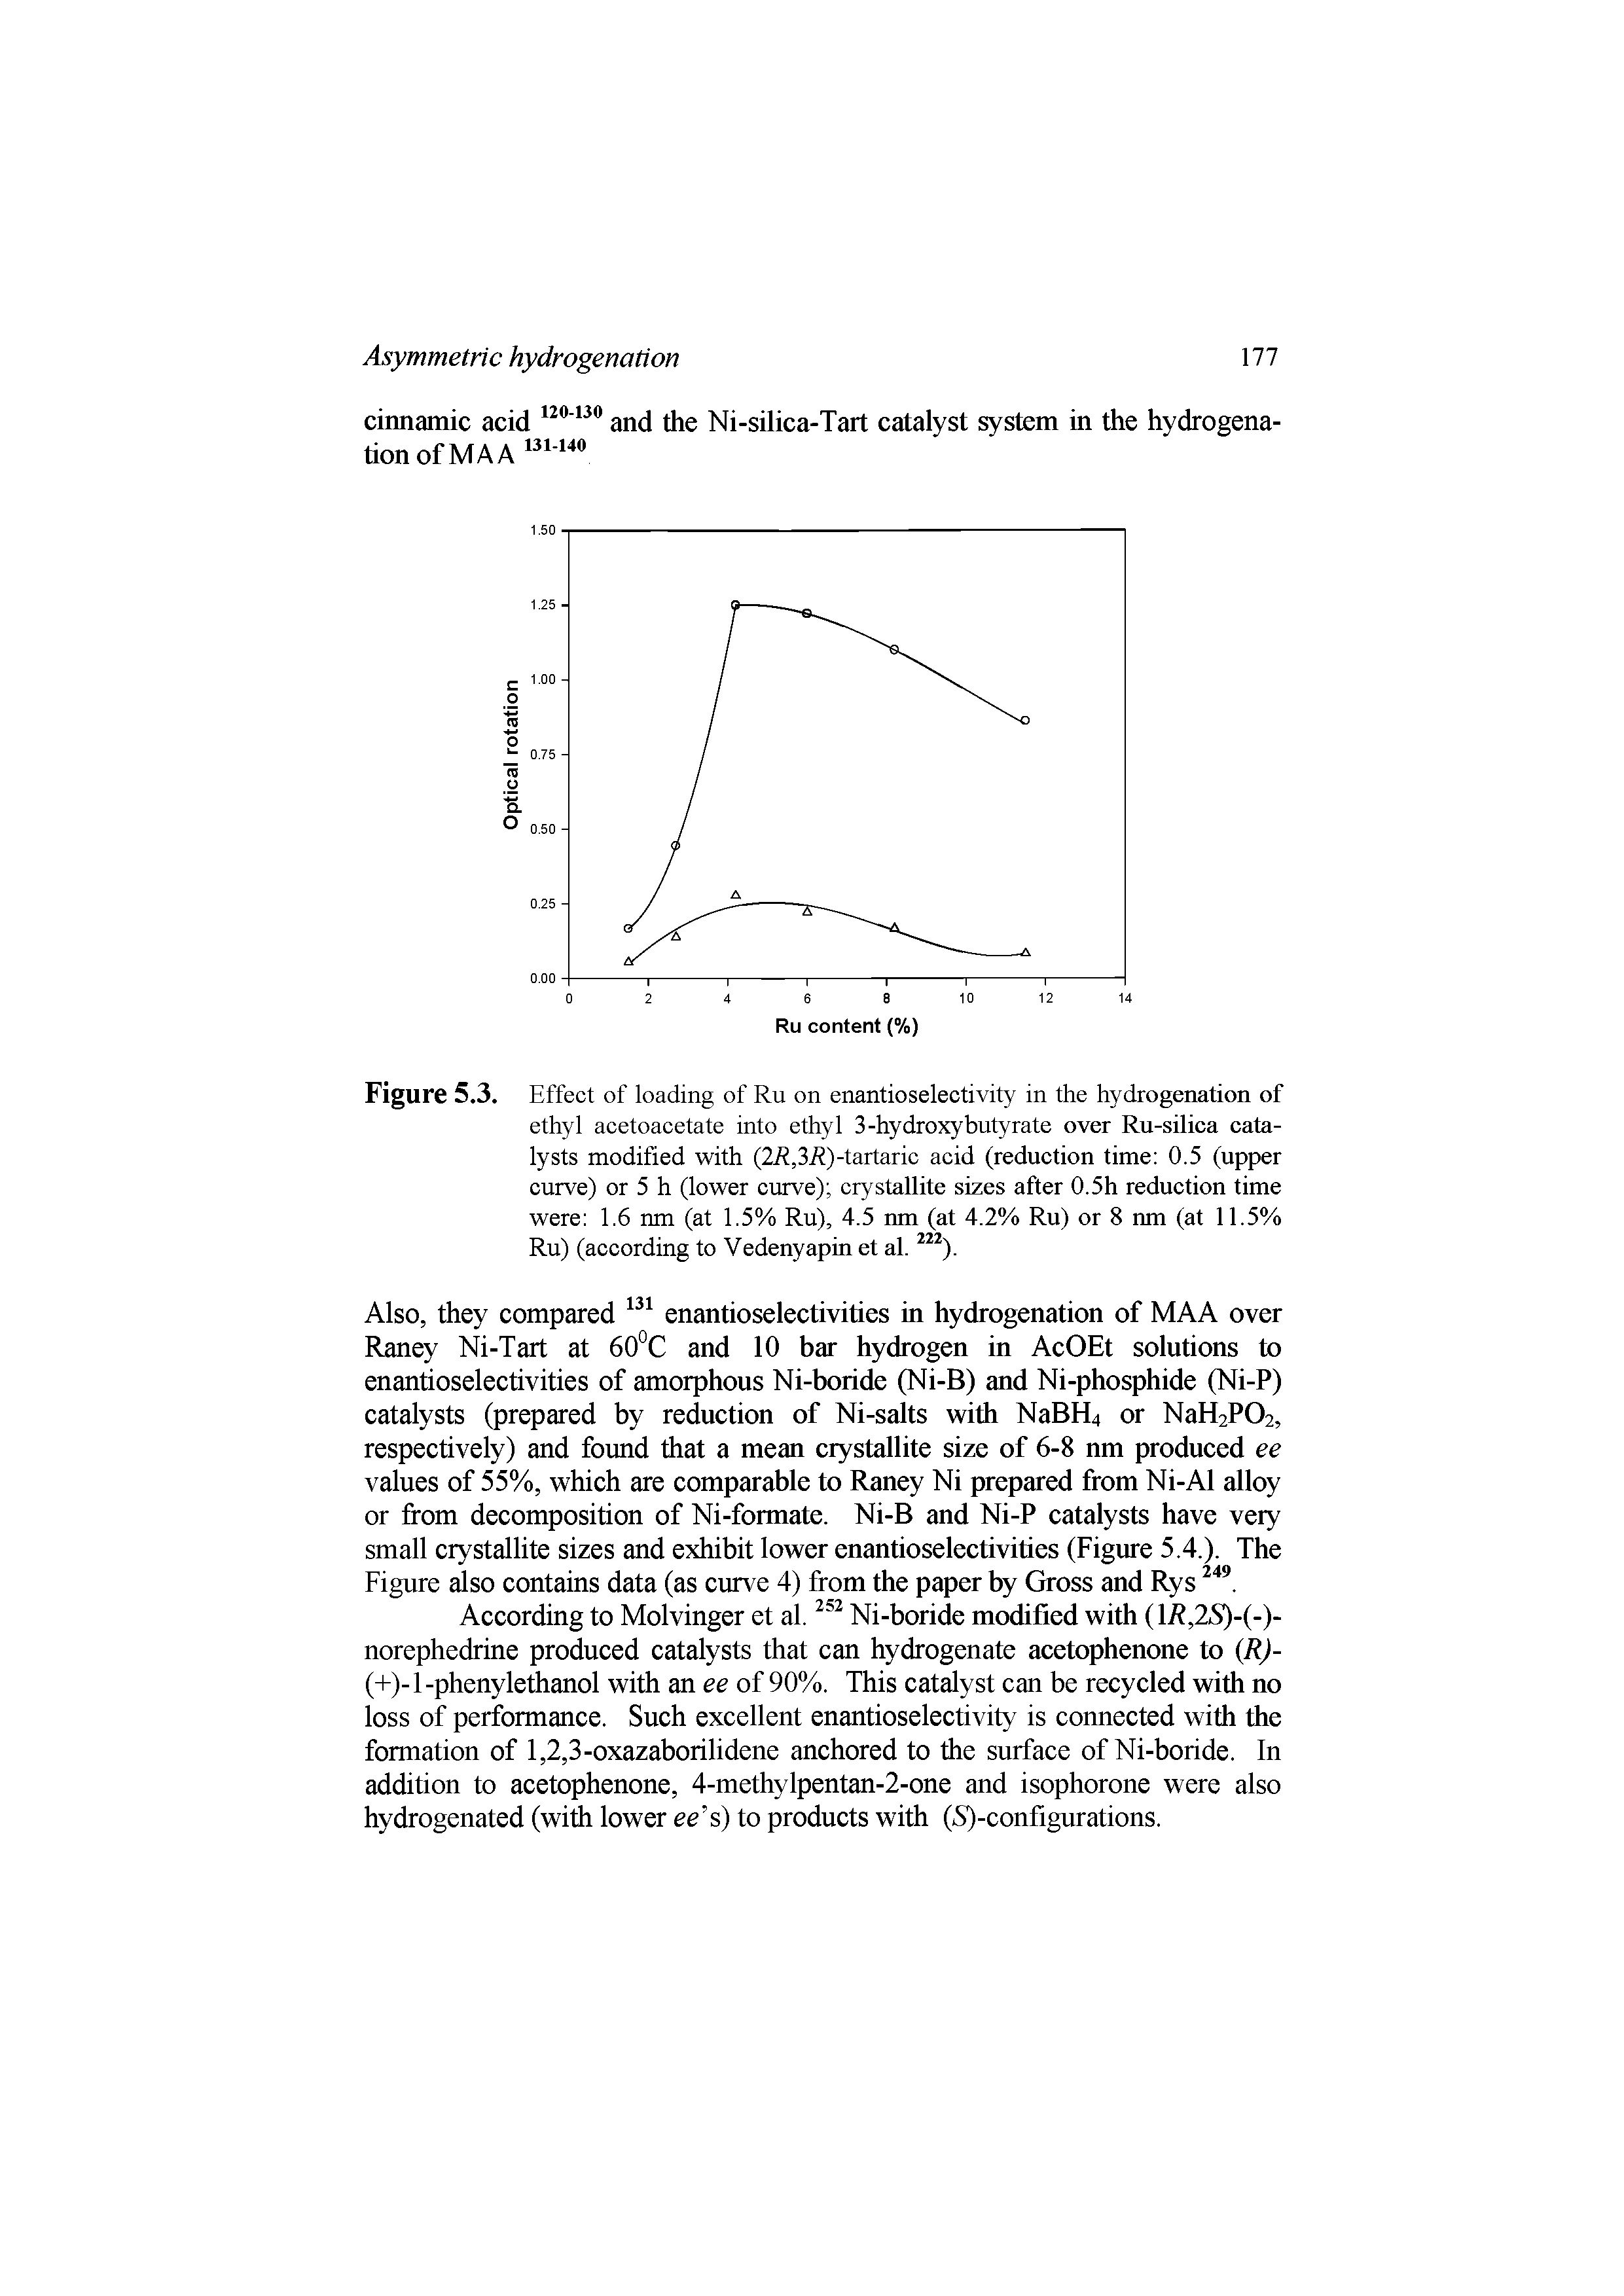 Figure 5.3. Effect of loading of Ru on enantioselectivity in the hydrogenation of ethyl acetoacetate into ethyl 3-hydroxybutyrate over Ru-silica catalysts modified with (2R,3R)-tartaric acid (reduction time 0.5 (upper curve) or 5 h (lower curve) crystallite sizes after 0.5h reduction time were 1.6 nm (at 1.5% Ru), 4.5 nm (at 4.2% Ru) or 8 nm (at 11.5% Ru) (according to Vedenyapin et al. ).